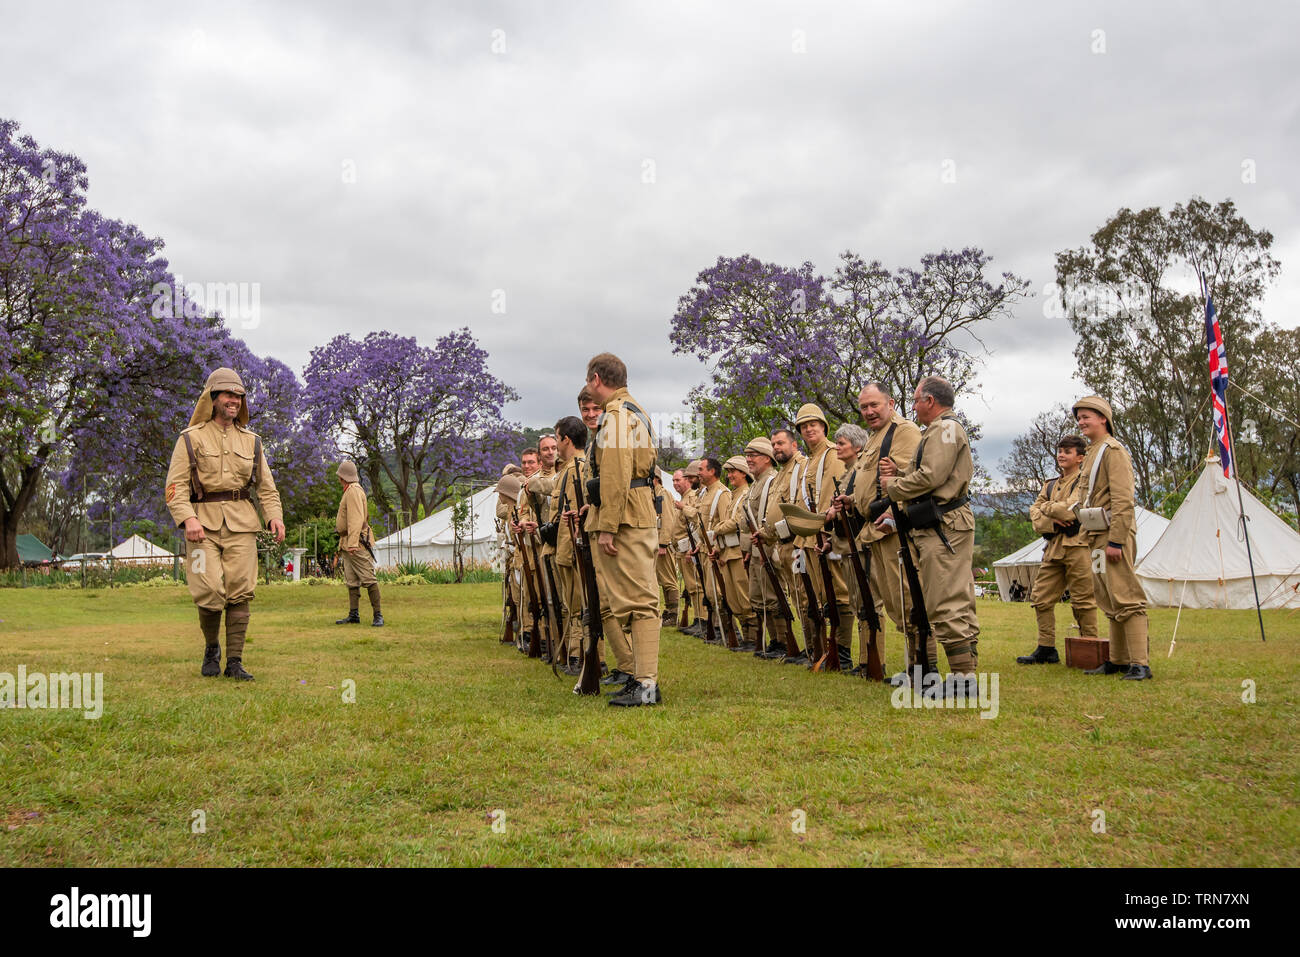 Talana Museum, Dundee, South Africa, 20th October, 2018. Members of the Dundee Diehards gather for the annual re-enactment of the October 20 1899 Battle of Talana Hill. It was the first major clash between British and Boer forces in the Second Boer War. The British suffered heavy casualties, including their general, Sir William Penn Symons, but won the day. Picture: Jonathan Oberholster/Alamy Stock Photo